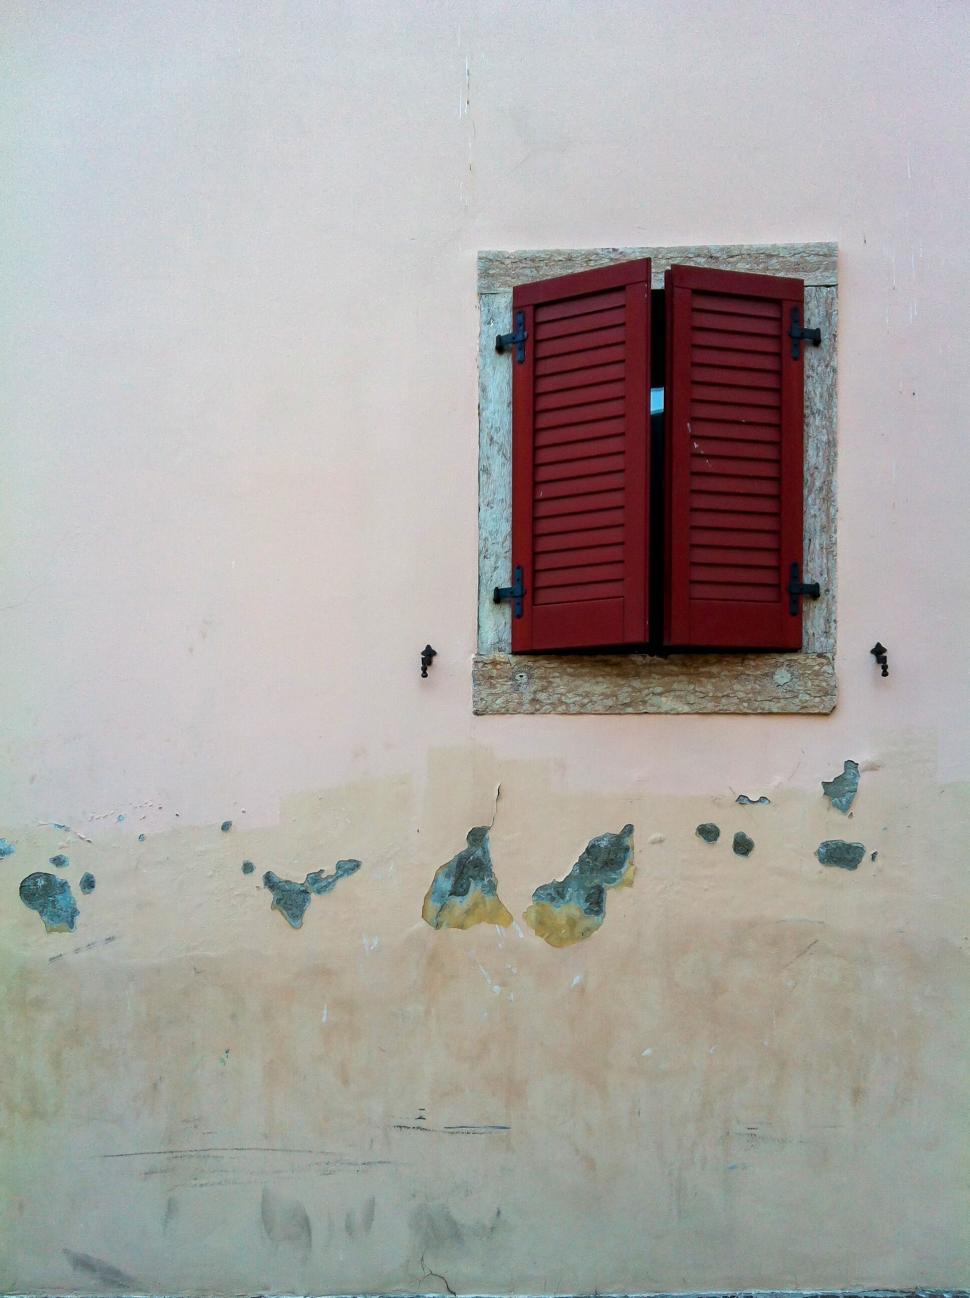 Free Image of Red shutters on a weathered wall in daylight 